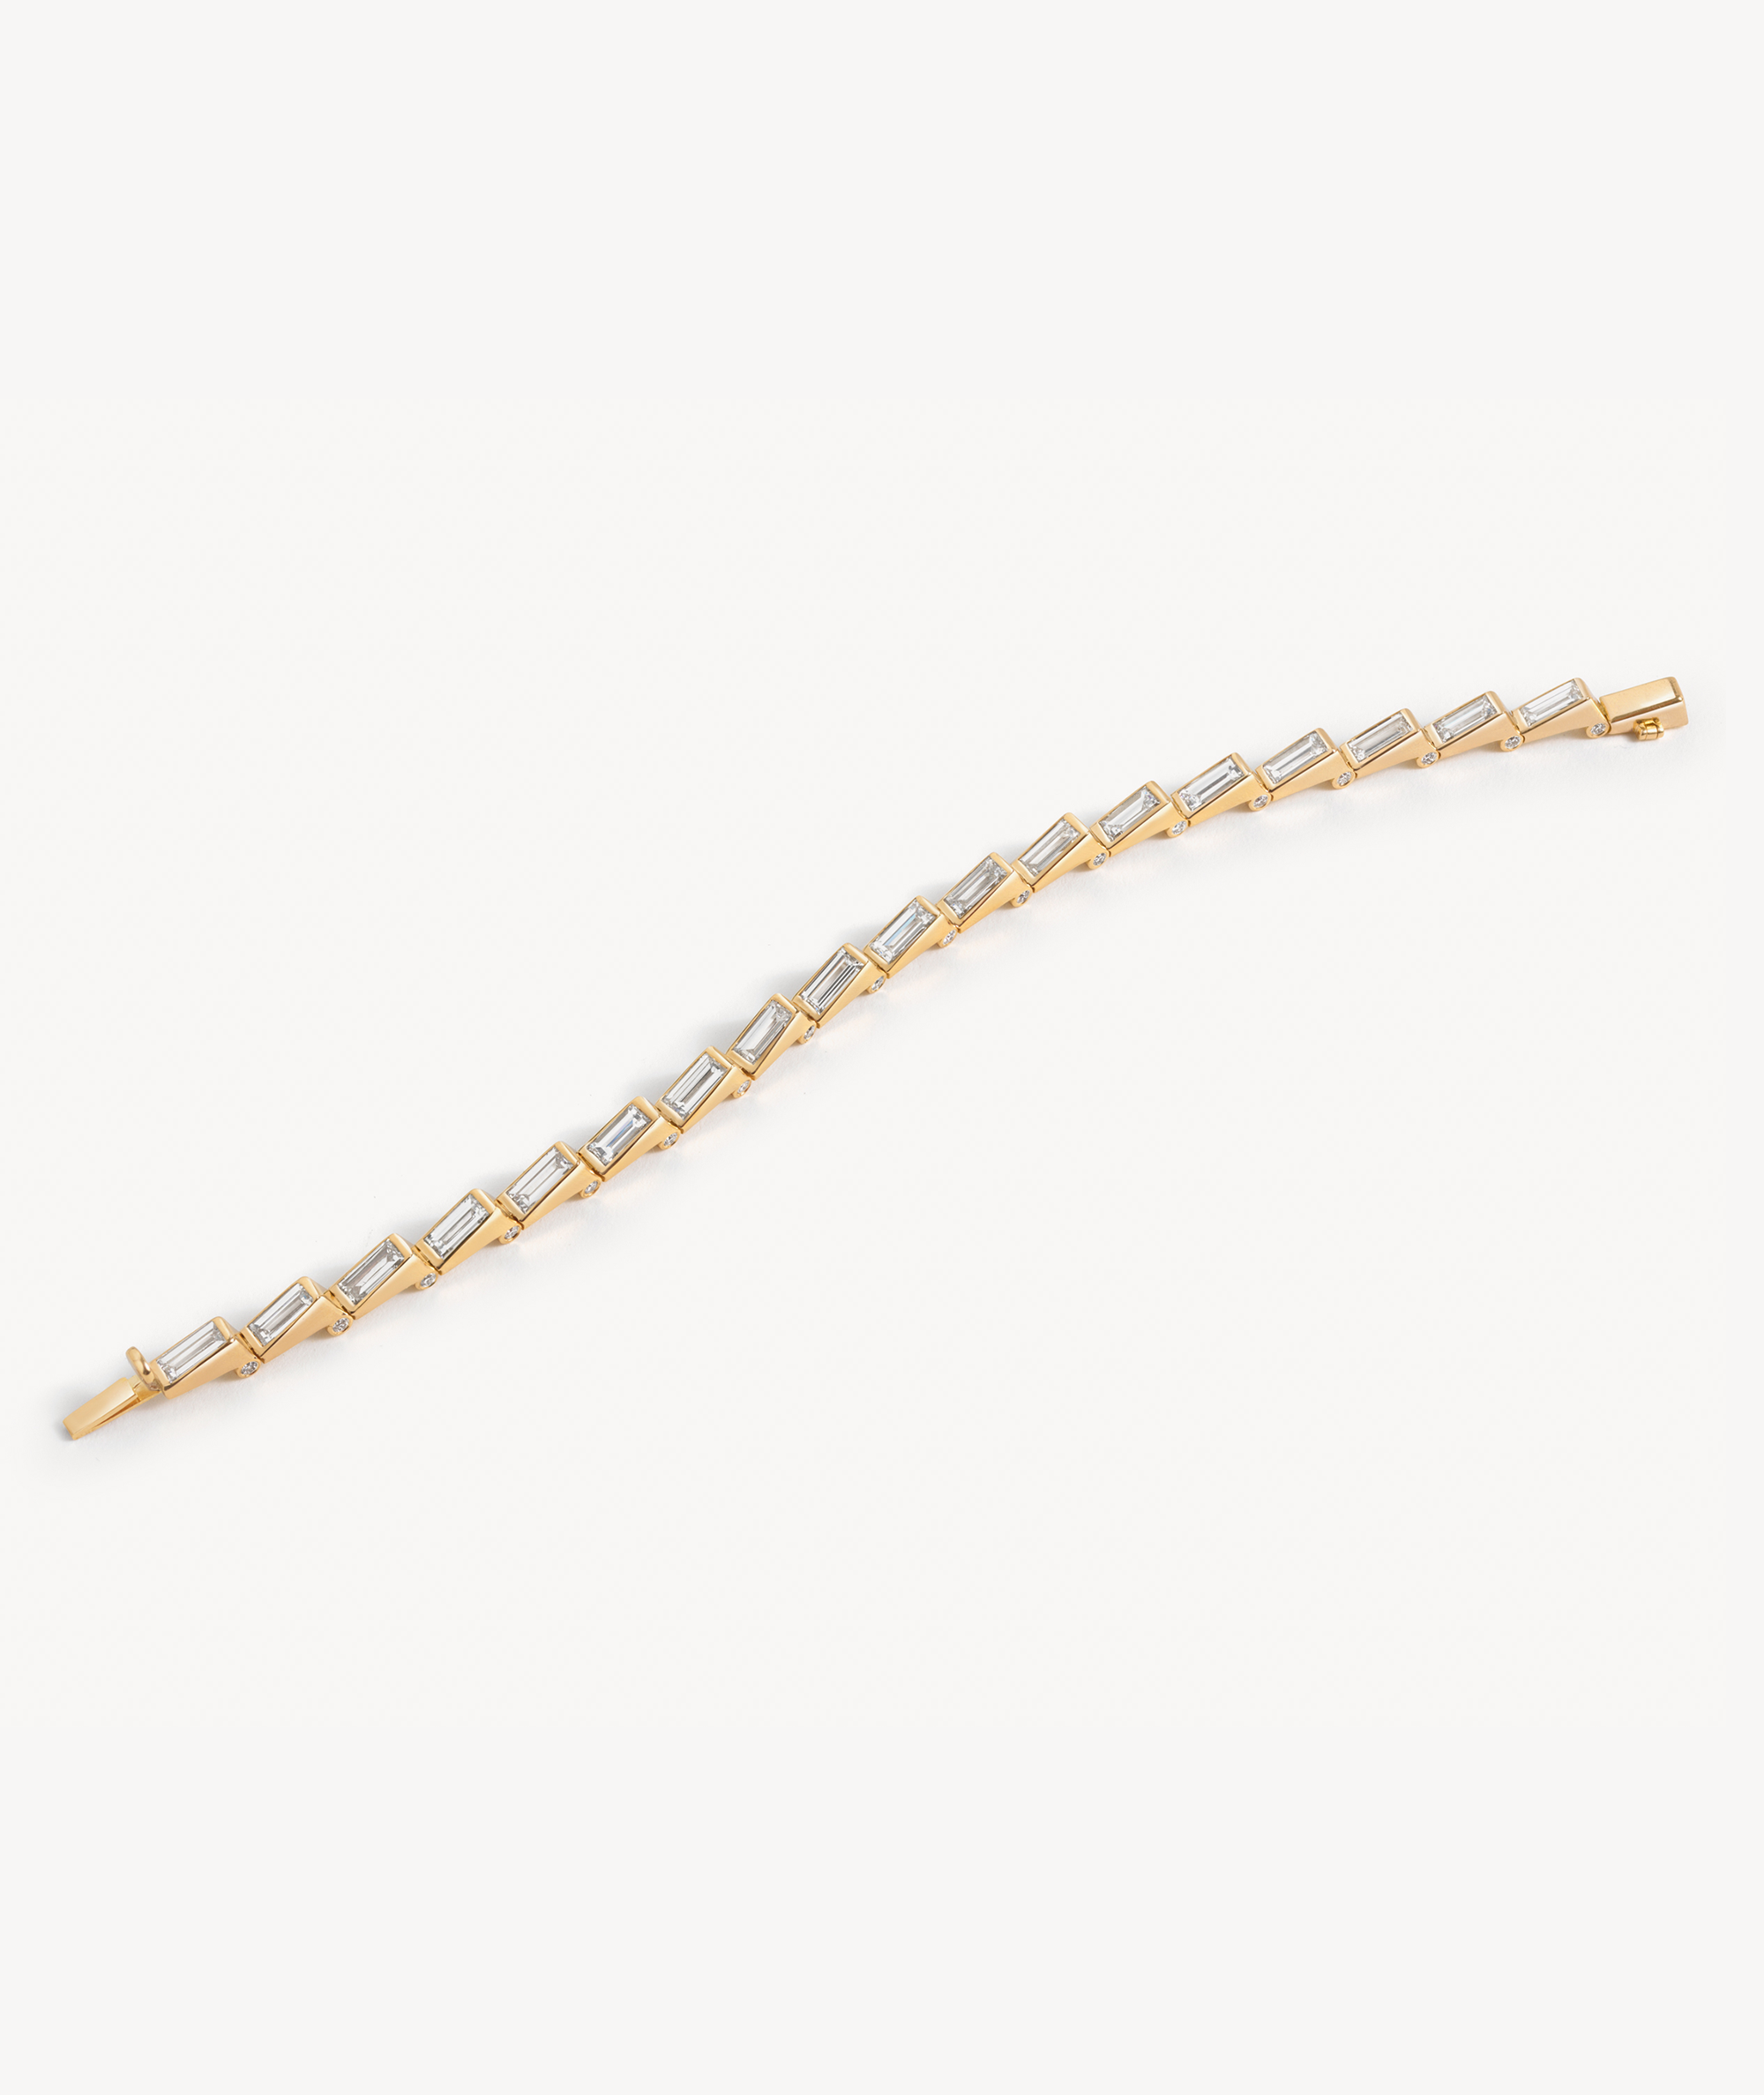 EREDE bracelet in 18k recycled yellow gold and lab-grown diamonds.